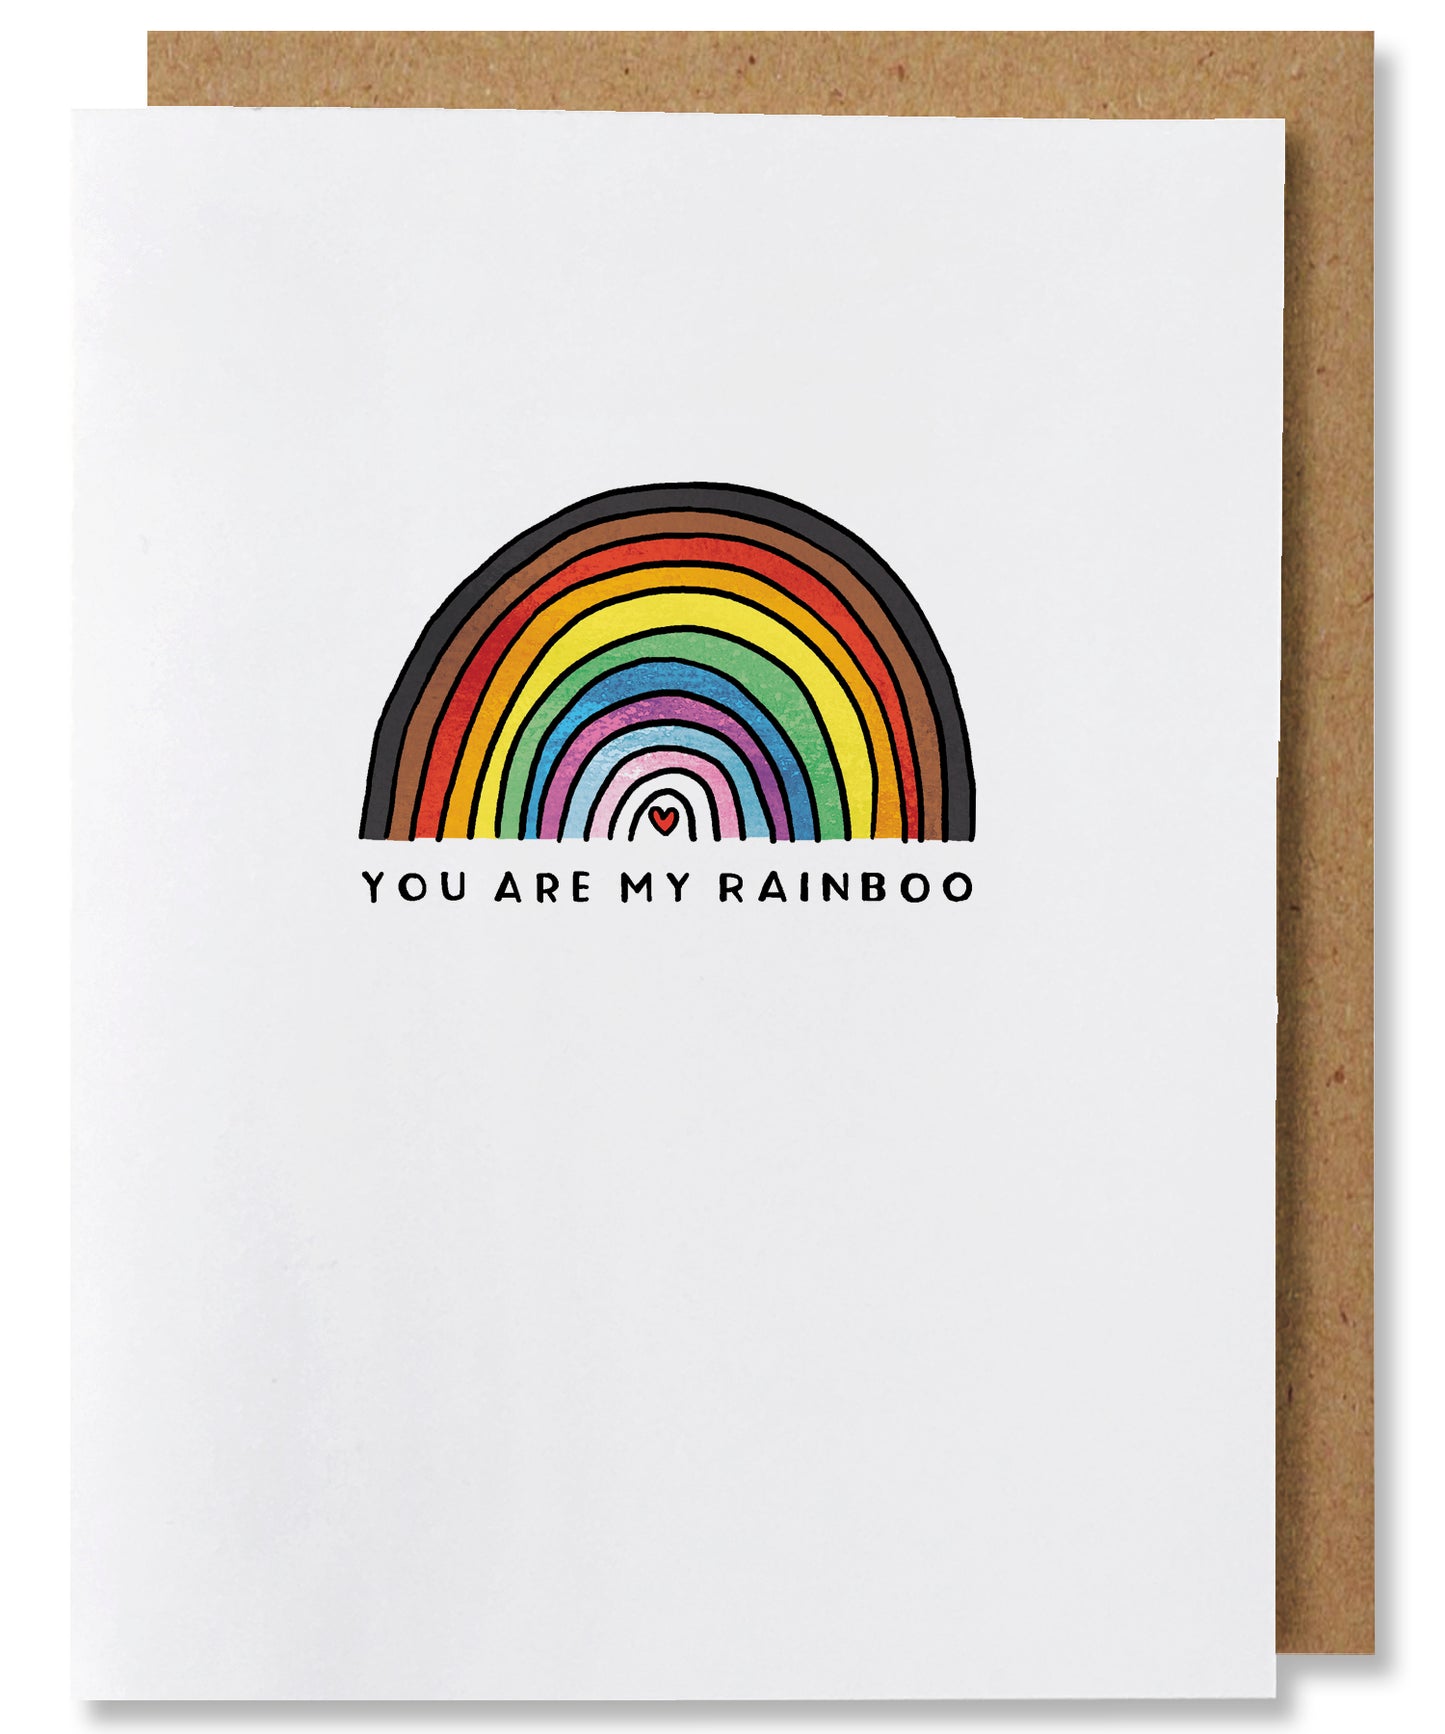 My Rainboo card features the LGBTQIA+ flag in the shape of a rainbow. The outermost color band is black, then brown, red, orange, yellow, green, blue, purple, with light blue, light pink, and white as the 3 innermost bands representing the Trans flag. In the very center of the rainbow is a tiny red heart. Below the rainbow are the words "You are my rainboo". This card is placed with a brown kraft envelope.